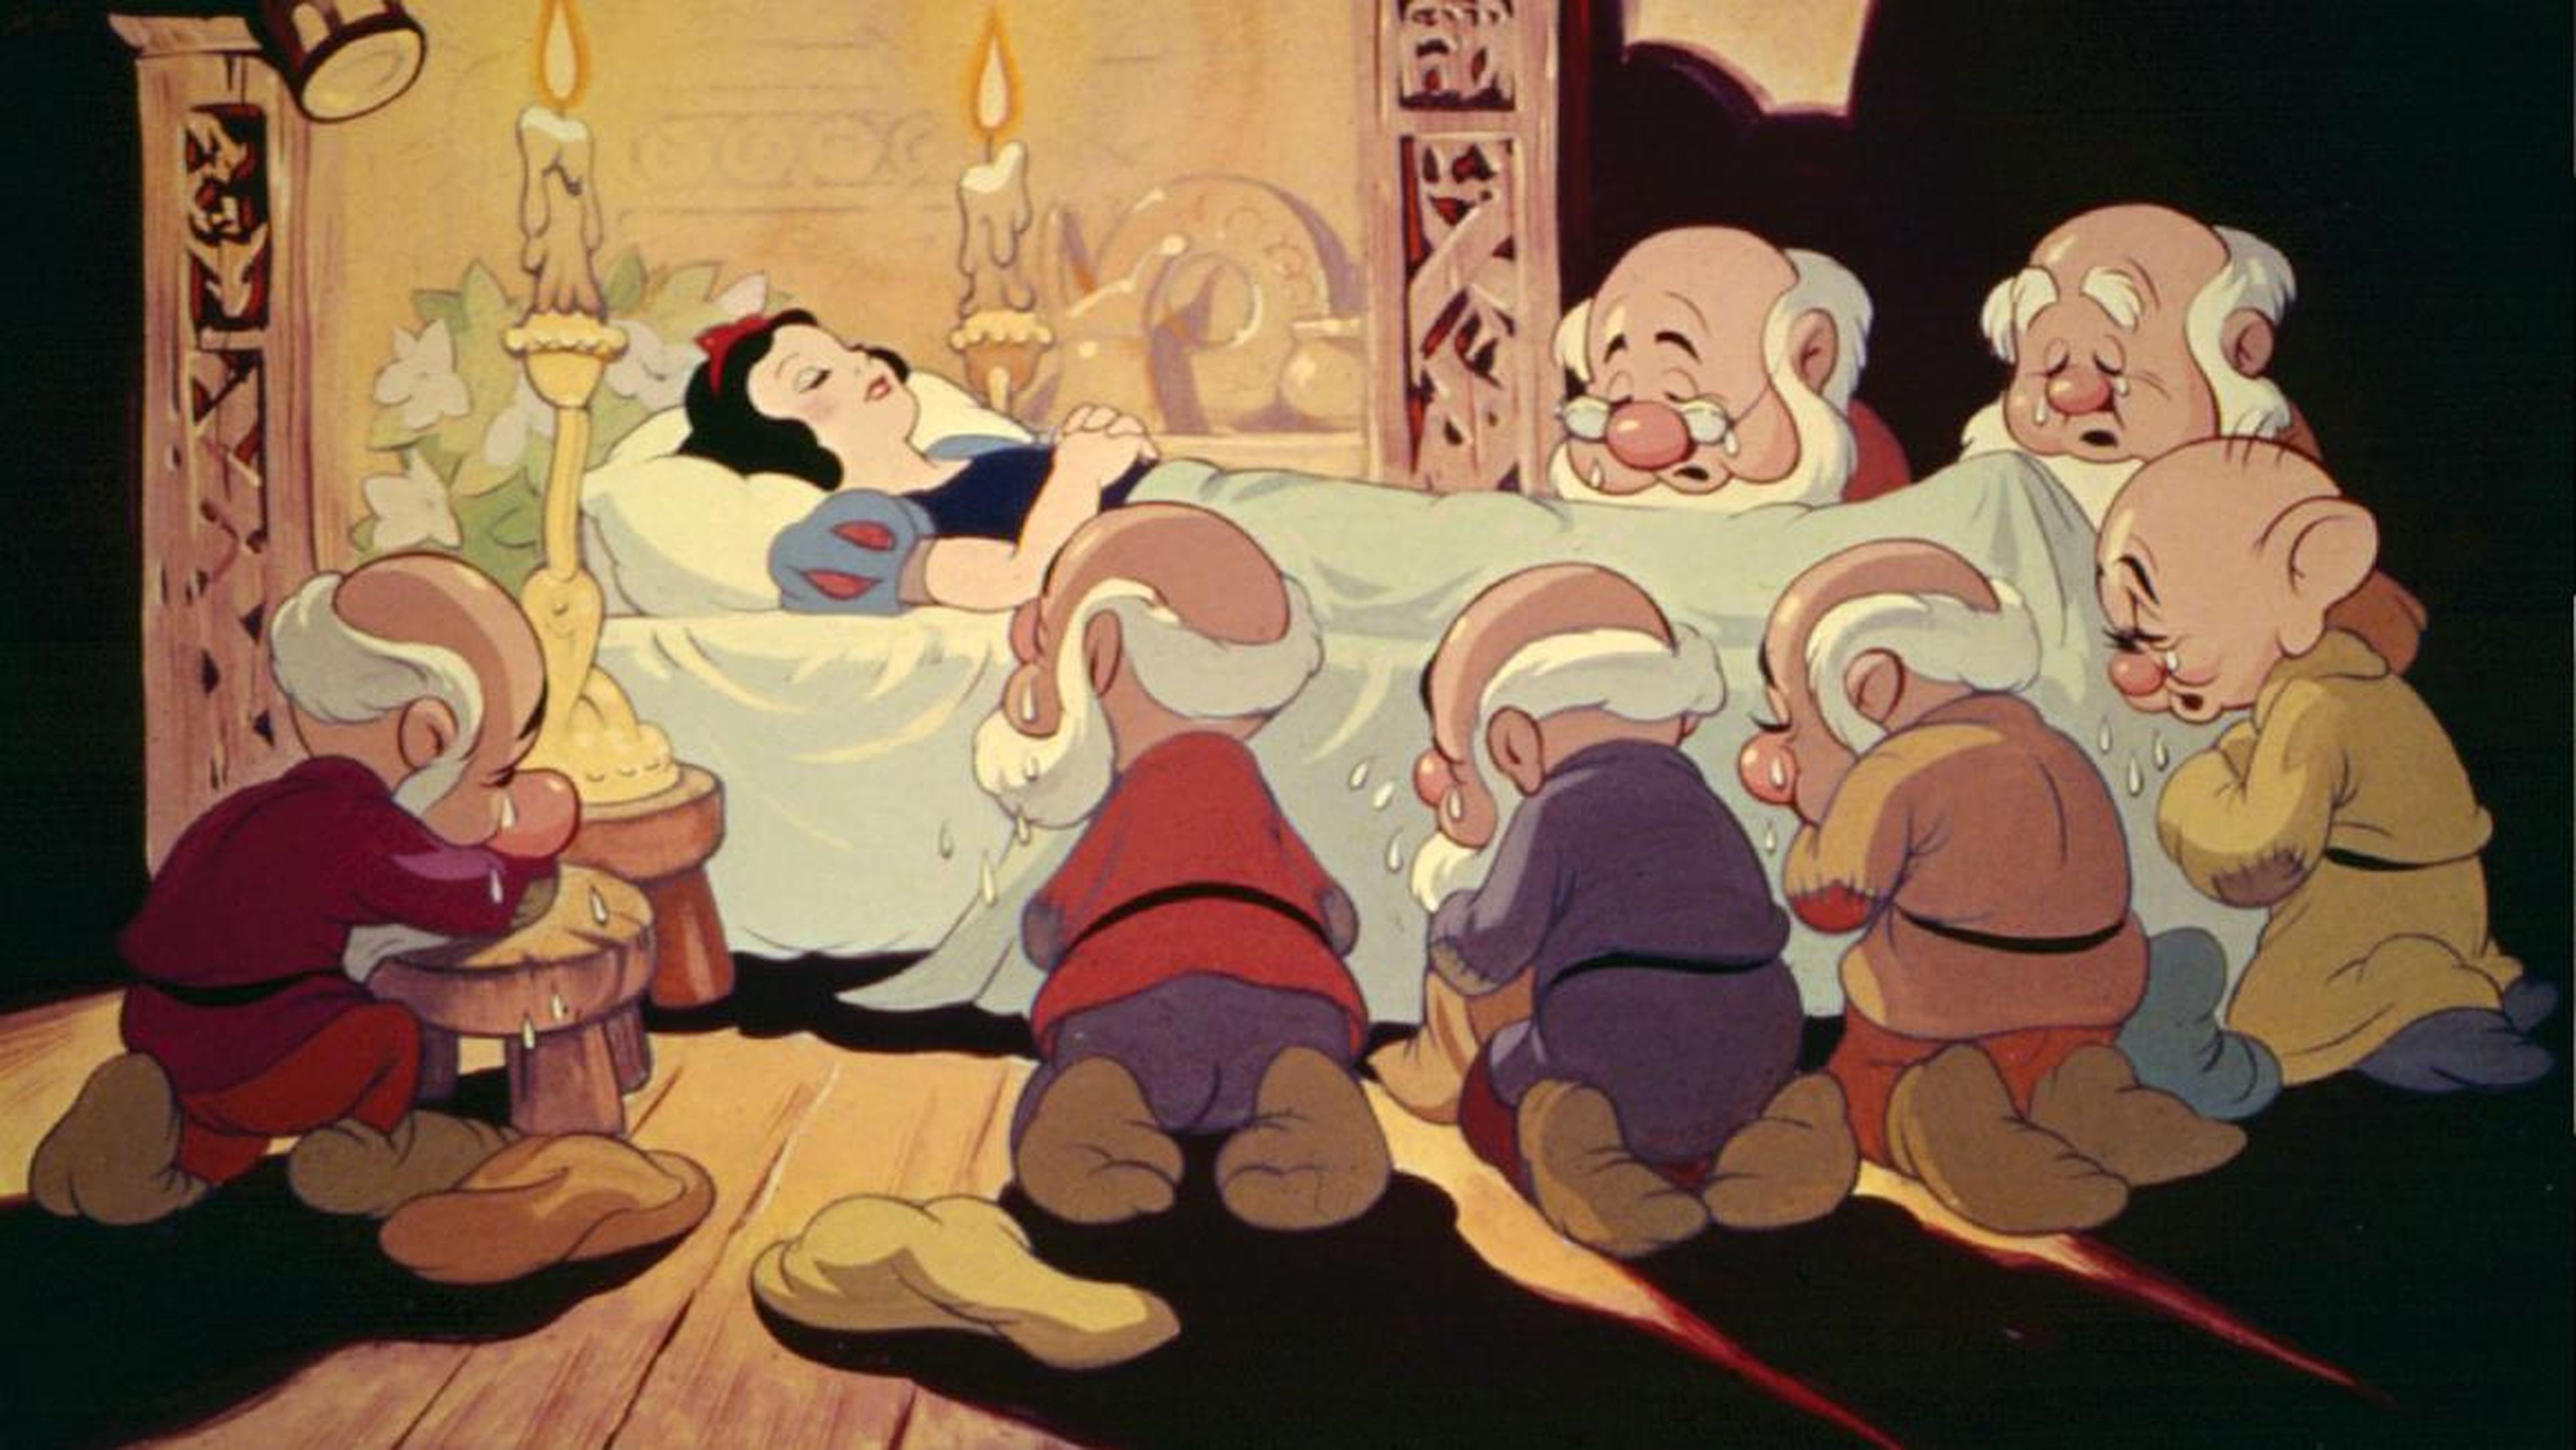 39. "Snow White and the Seven Dwarfs" (1938)